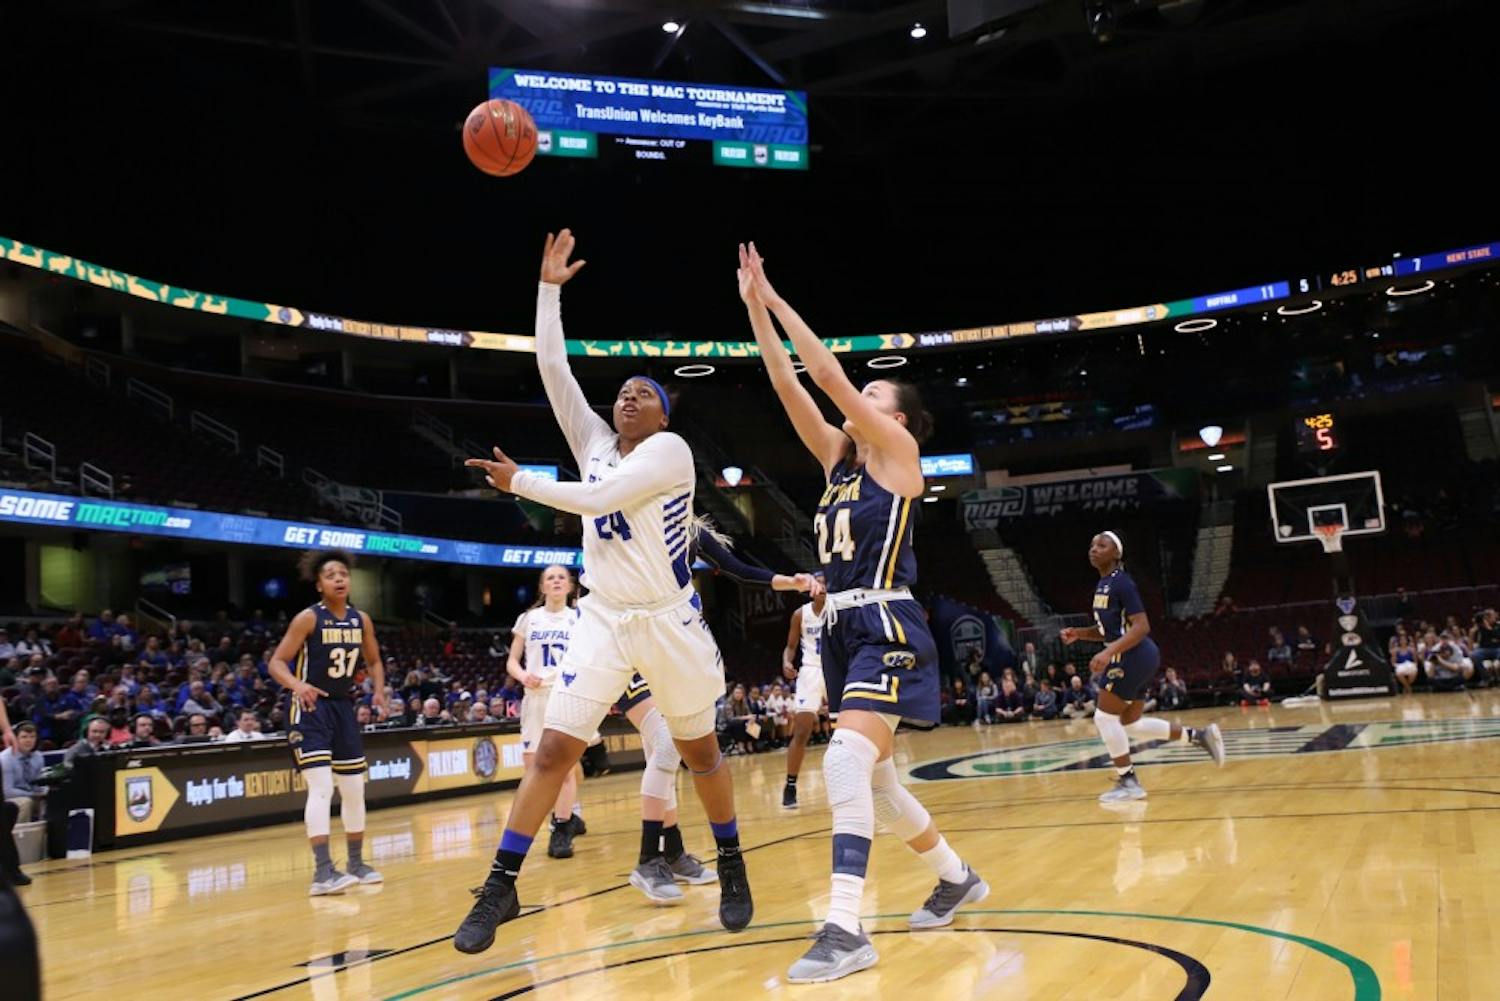 Senior guard Cierra Dillard lays it in against Kent State. Dillard and the Bulls move on to face Central Michigan on Friday in the semifinals.